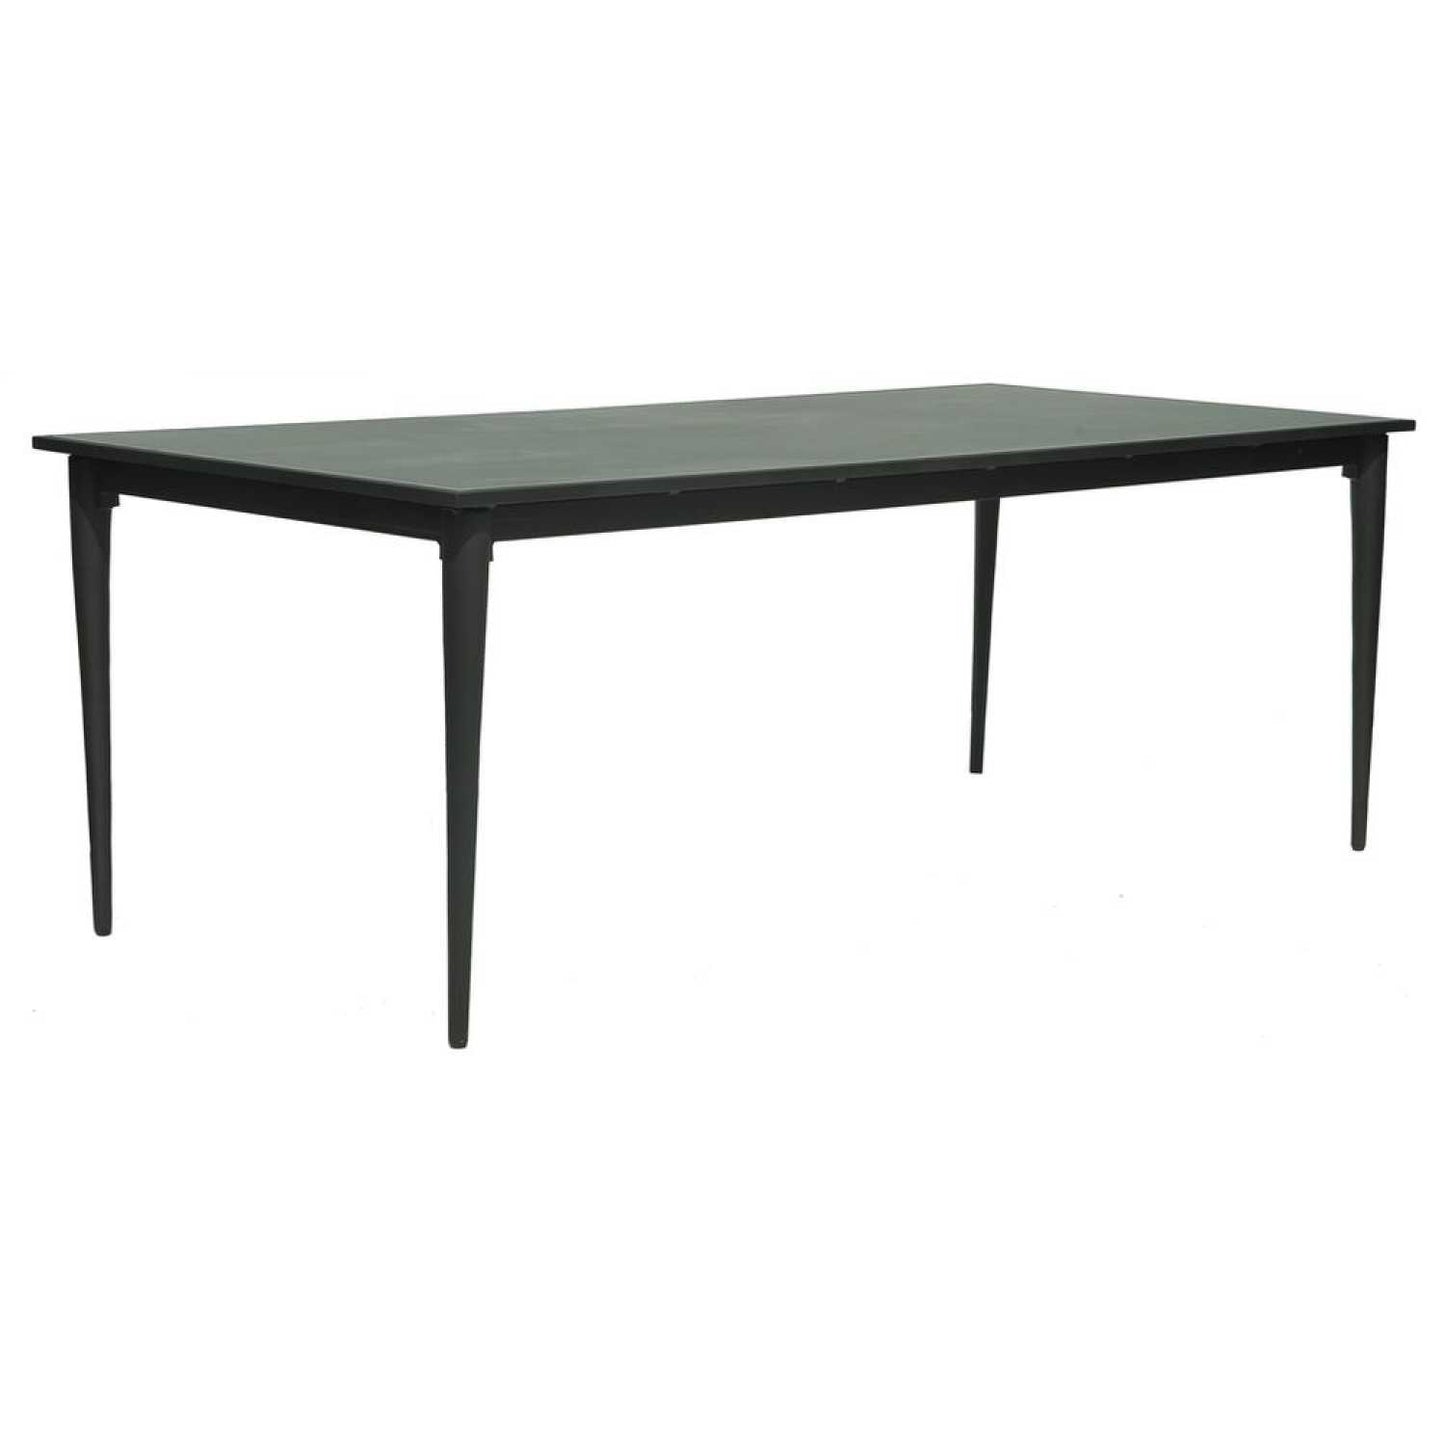 Serpent Rectangle Dining Table (6 Seat or 8 Seat) - PadioLiving - Serpent Rectangle Dining Table (6 Seat or 8 Seat) - Outdoor Dining Table - 8 Seat - PadioLiving